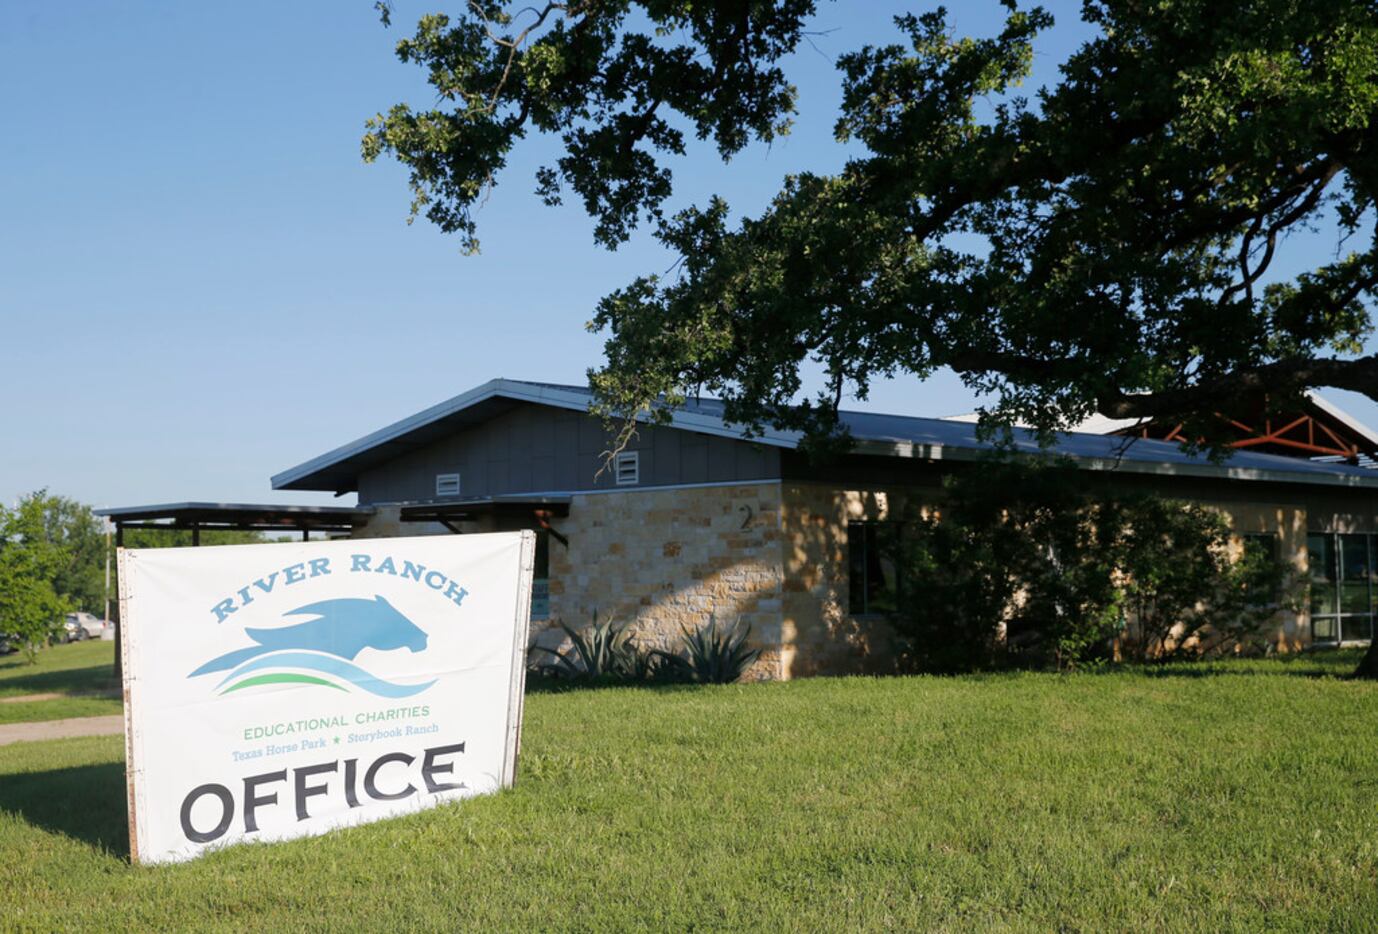 River Ranch has no intentions of leaving the Texas Horse Park, says its attorney Don Flanary...